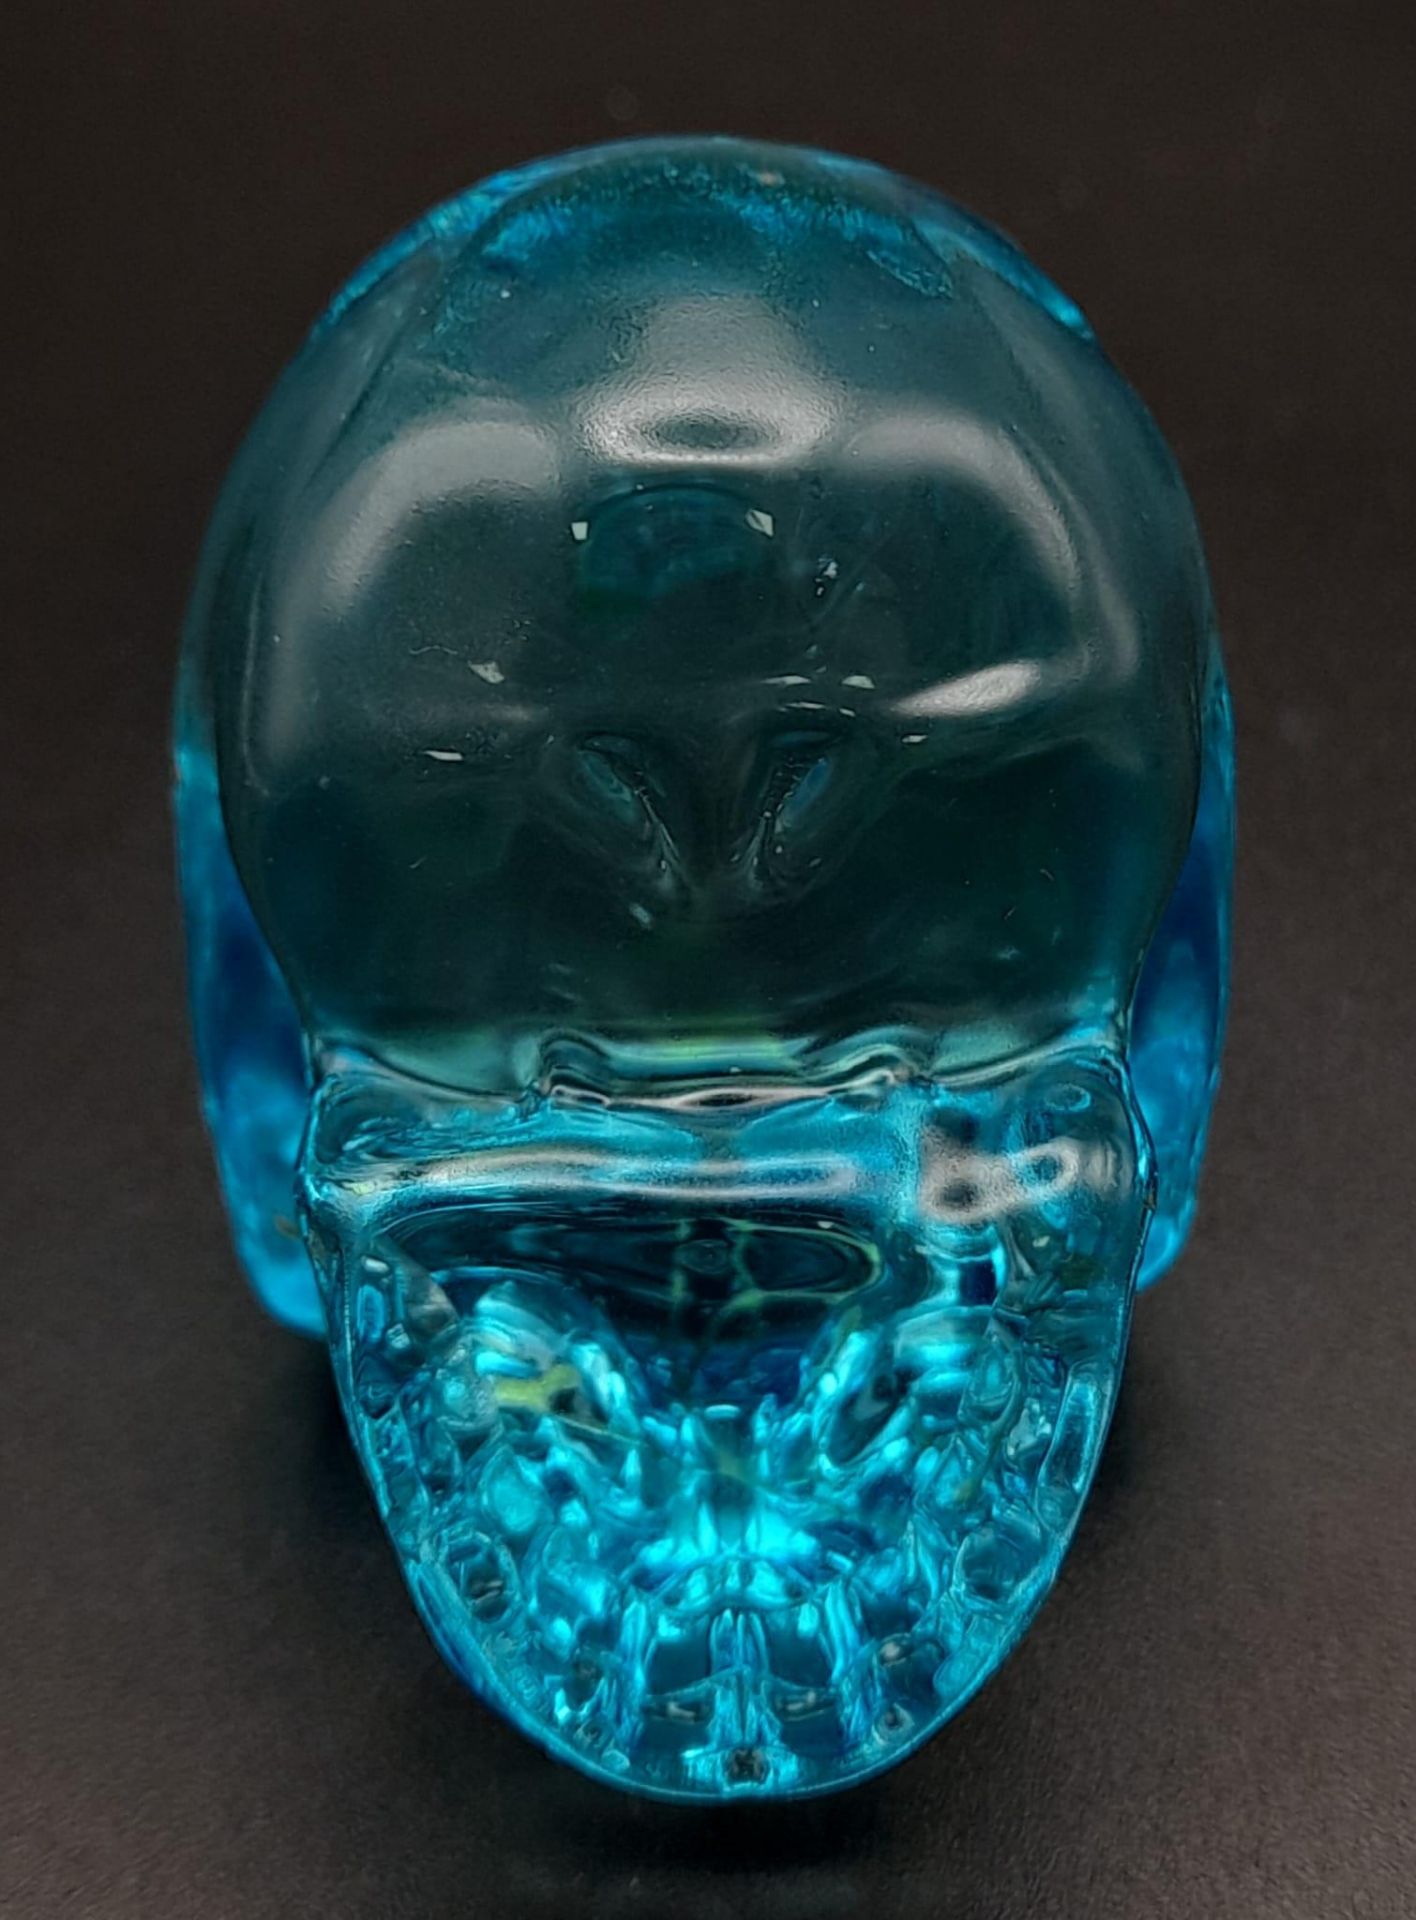 A Hand-Carved Blue Crystal Quartz Skull Figure. Paperweight or curiosity. %cm x 4cm - Image 4 of 5